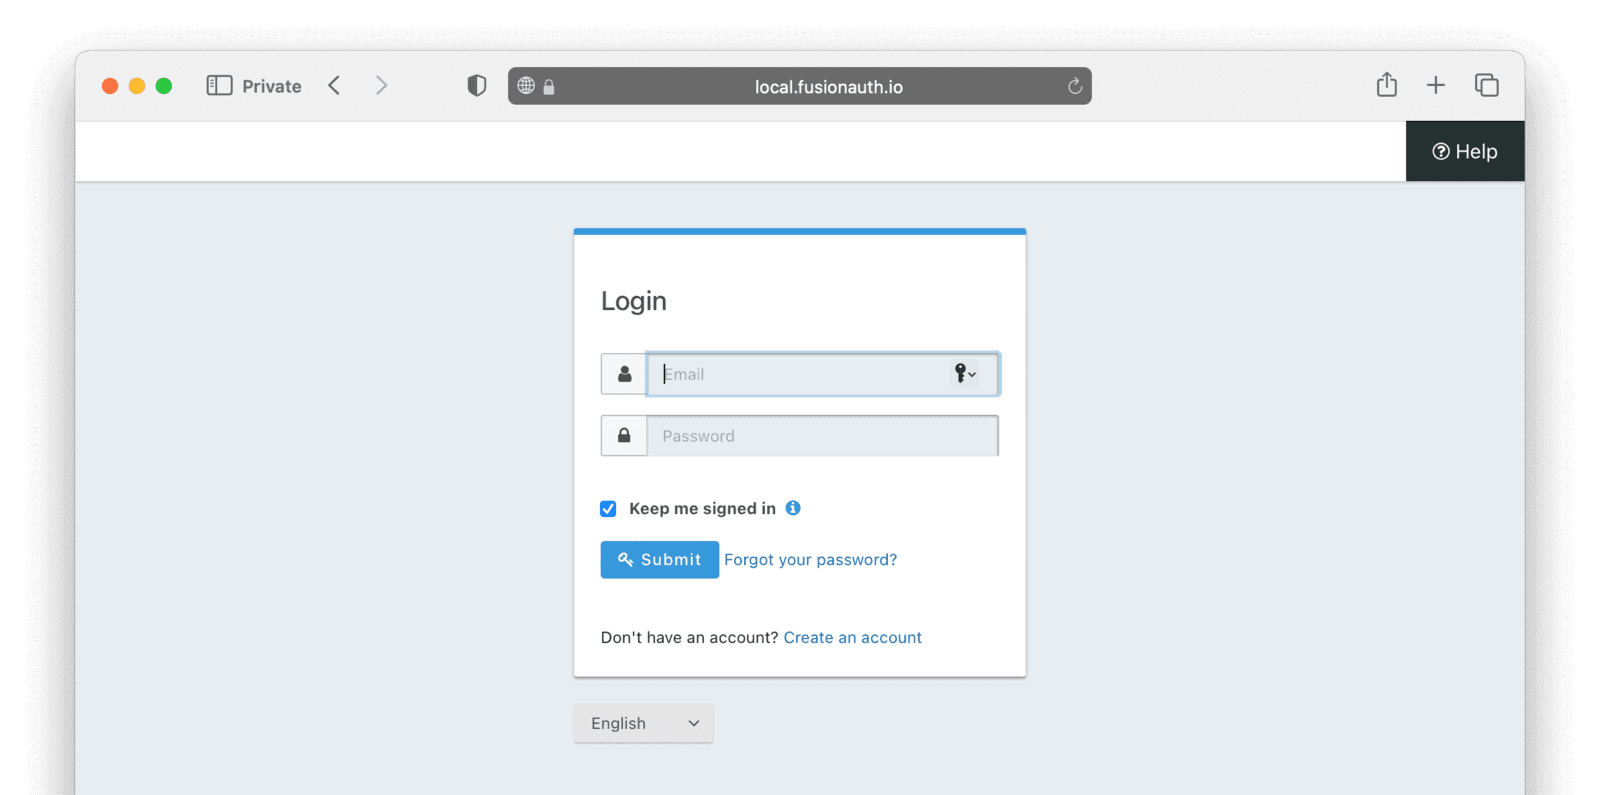 The FusionAuth login page